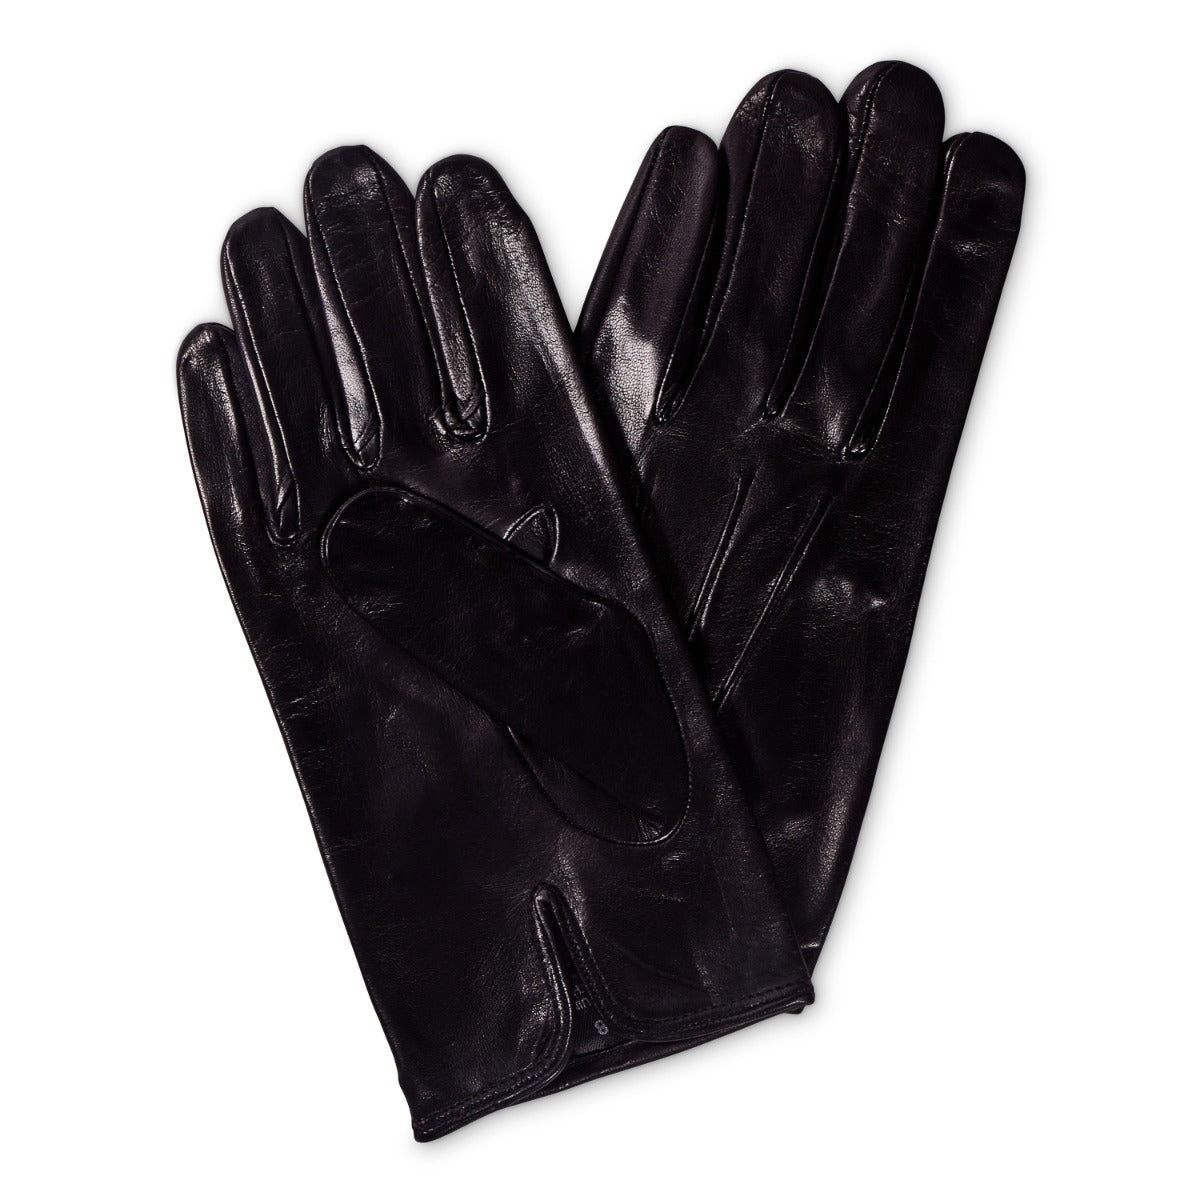 A pair of Sovereign Grade Black Nappa Leather Gloves, Silk Lined by KirbyAllison.com on a white background.